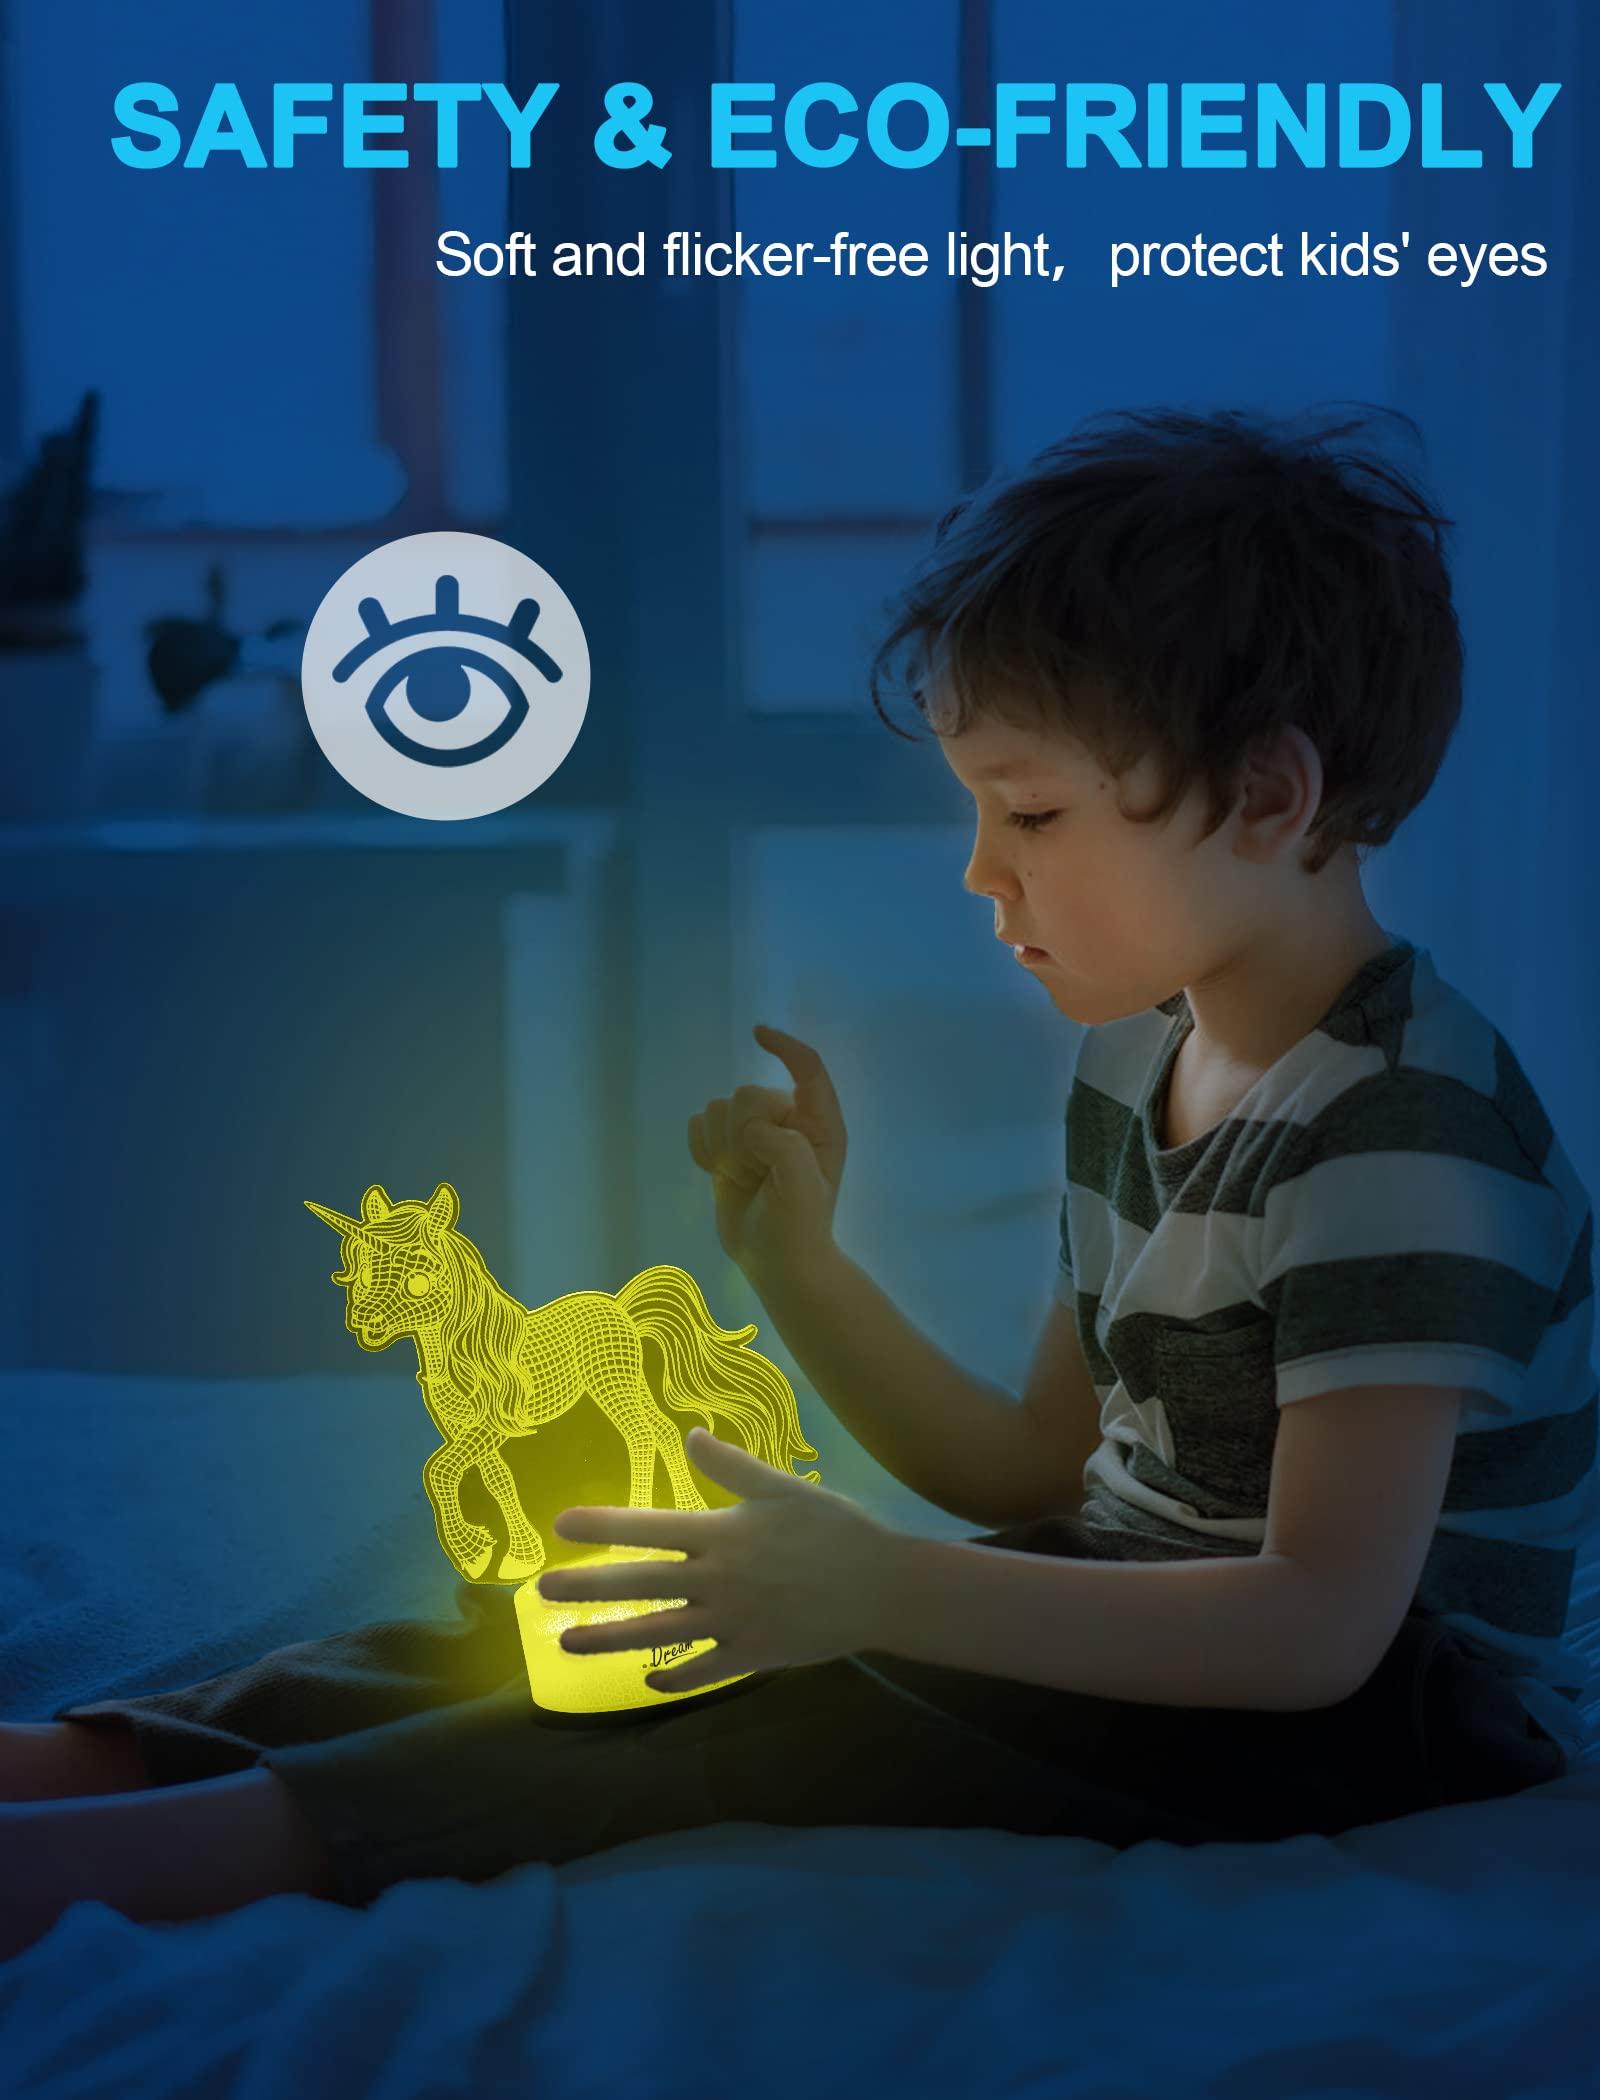 Nice Dream Unicorn Night Light for Kids,3D Illusion Night Lamp,16 Colors Changes with Remote Control,Unicorns Gifts for Girls,Toys Birthday Bedroom Decor for Children Boys 2